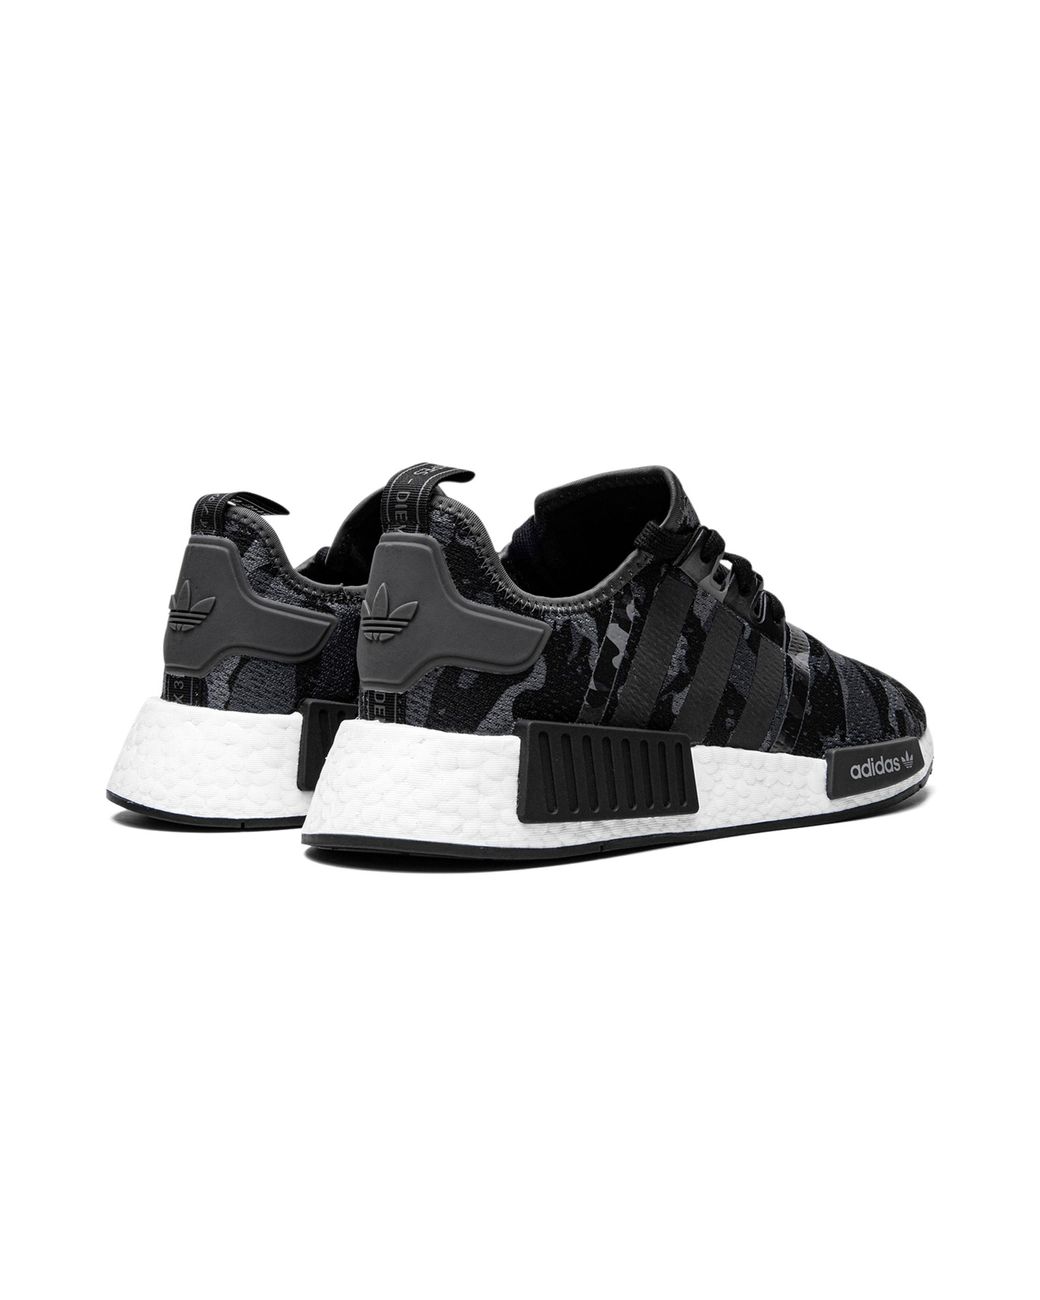 adidas Nmd R1 "camo Black Grey" Shoes for Men | Lyst UK